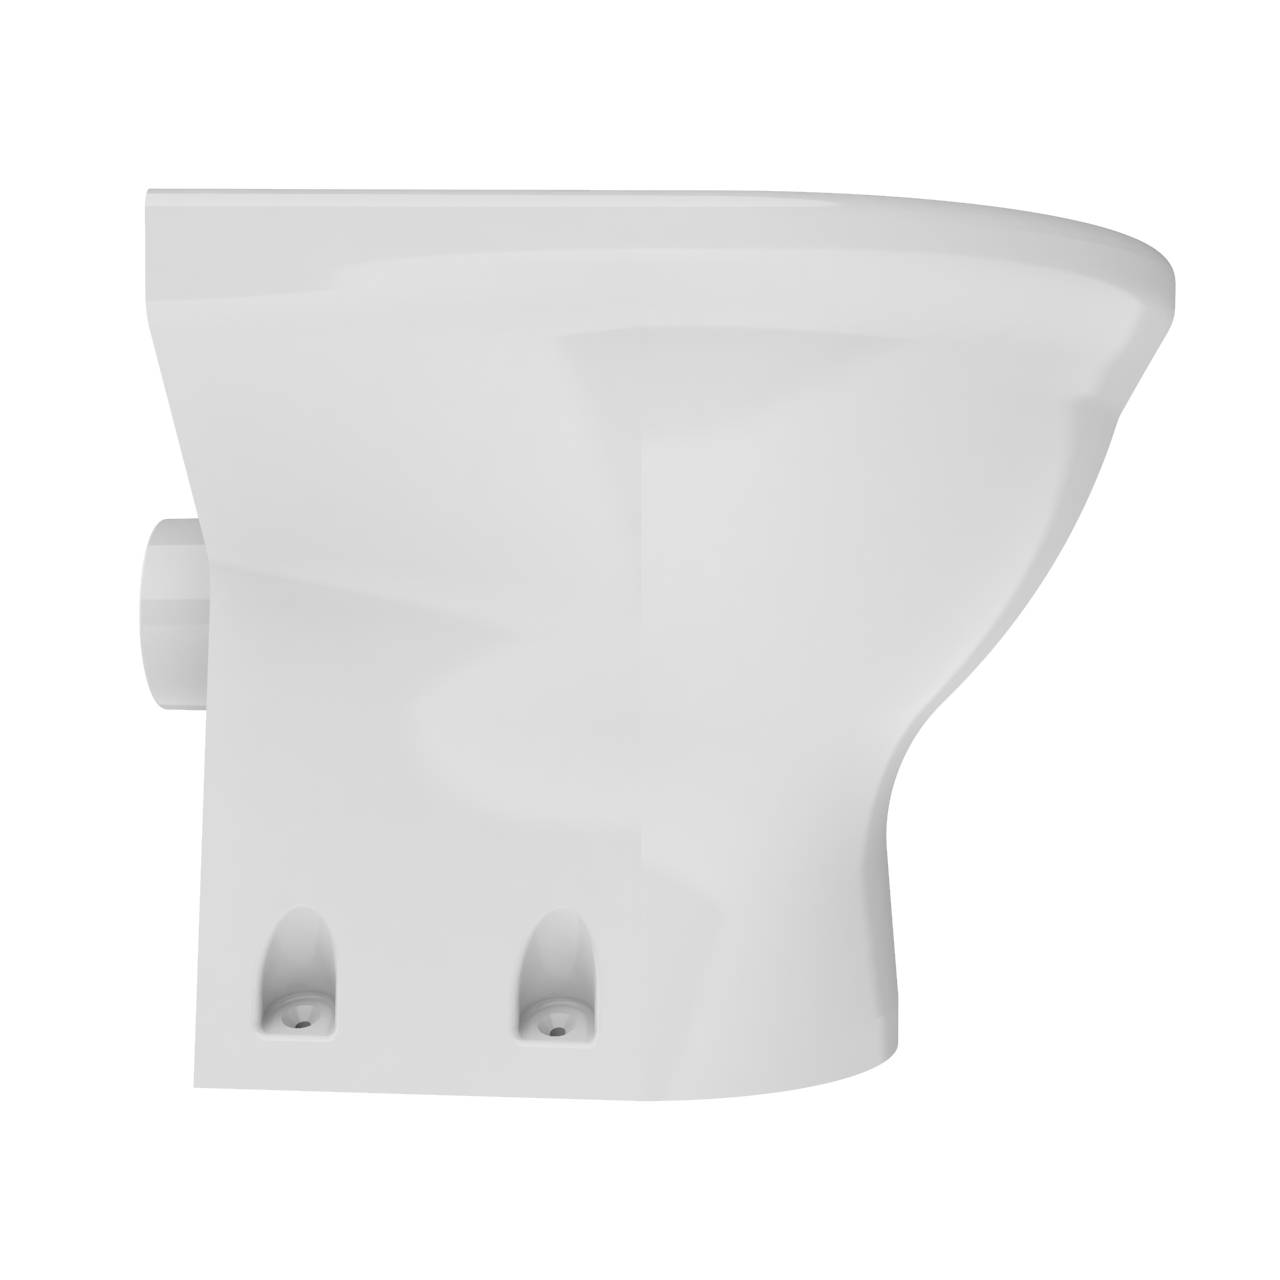 Dudley Resan Standard Height WC Pan - Floor Fixed - Blue Seat [V2] - Sanitaryware